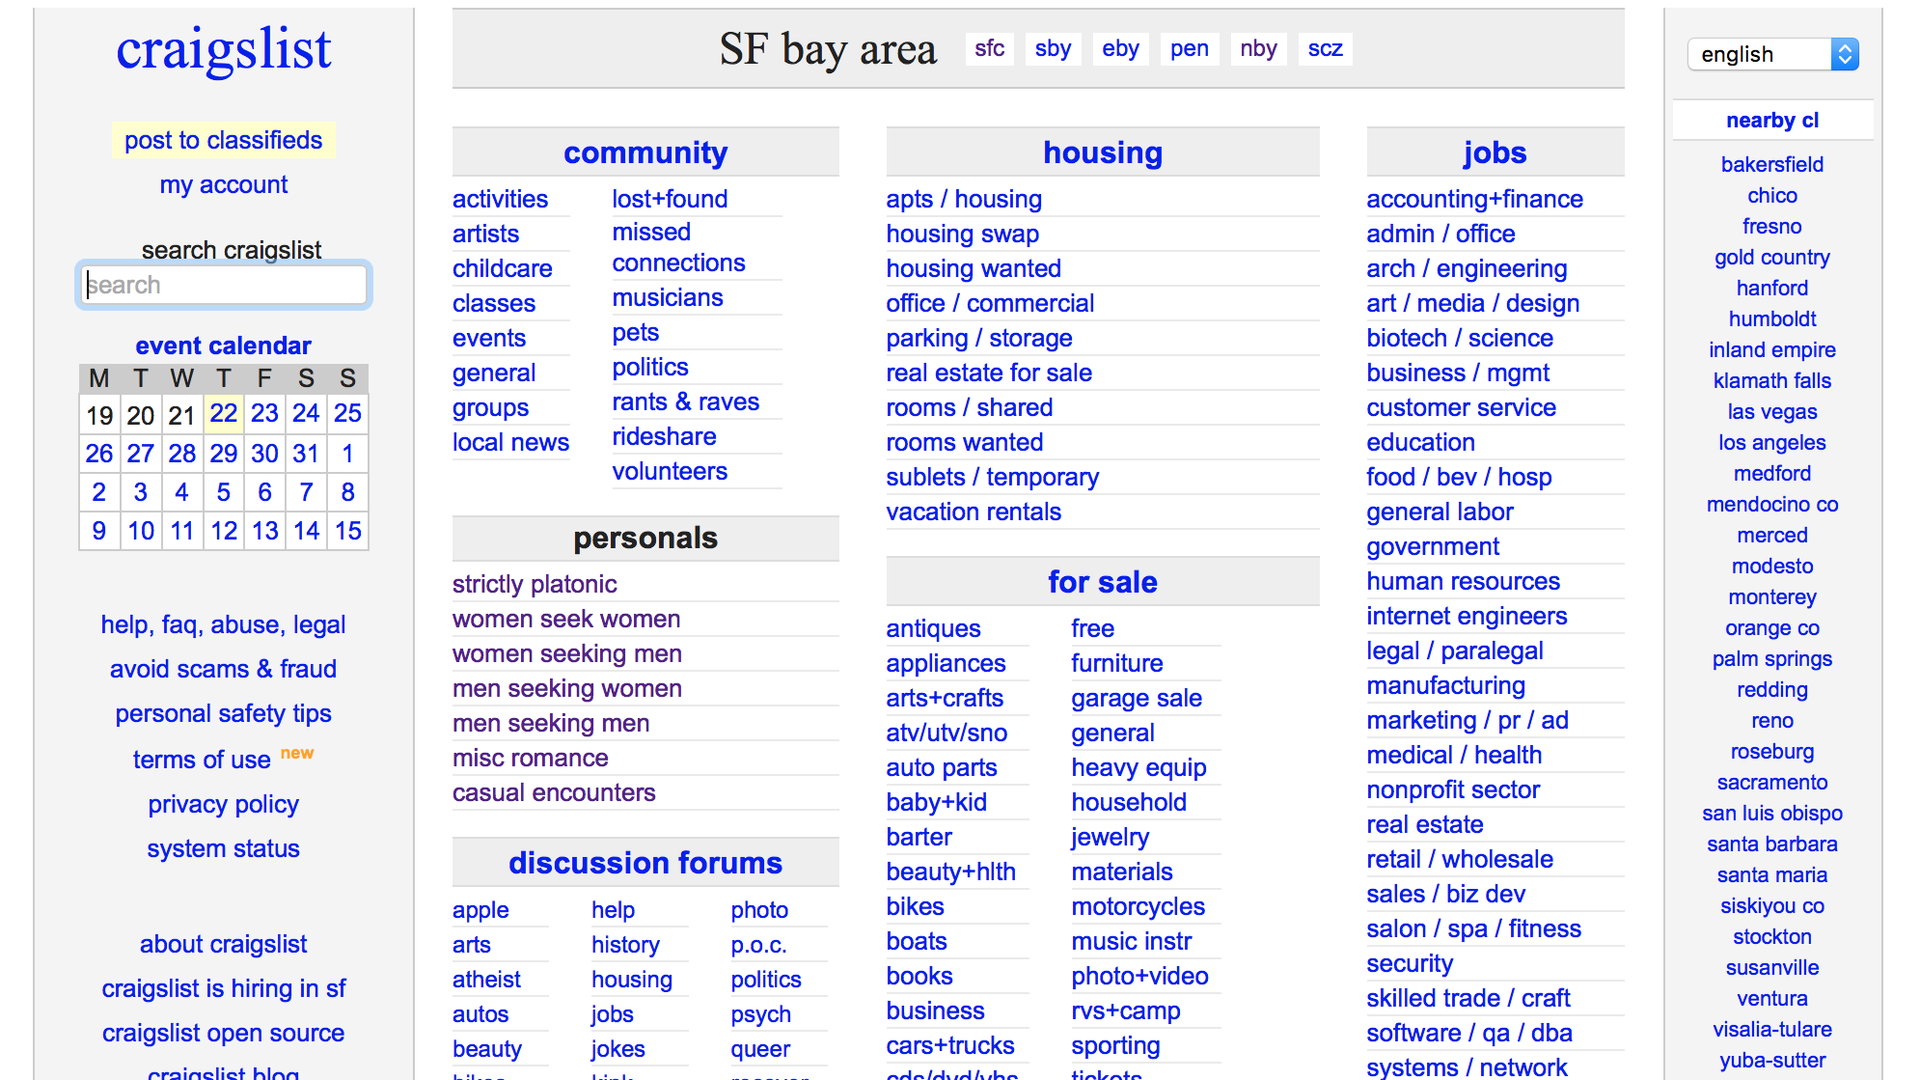 Craigslist site, including the now-removed personals section